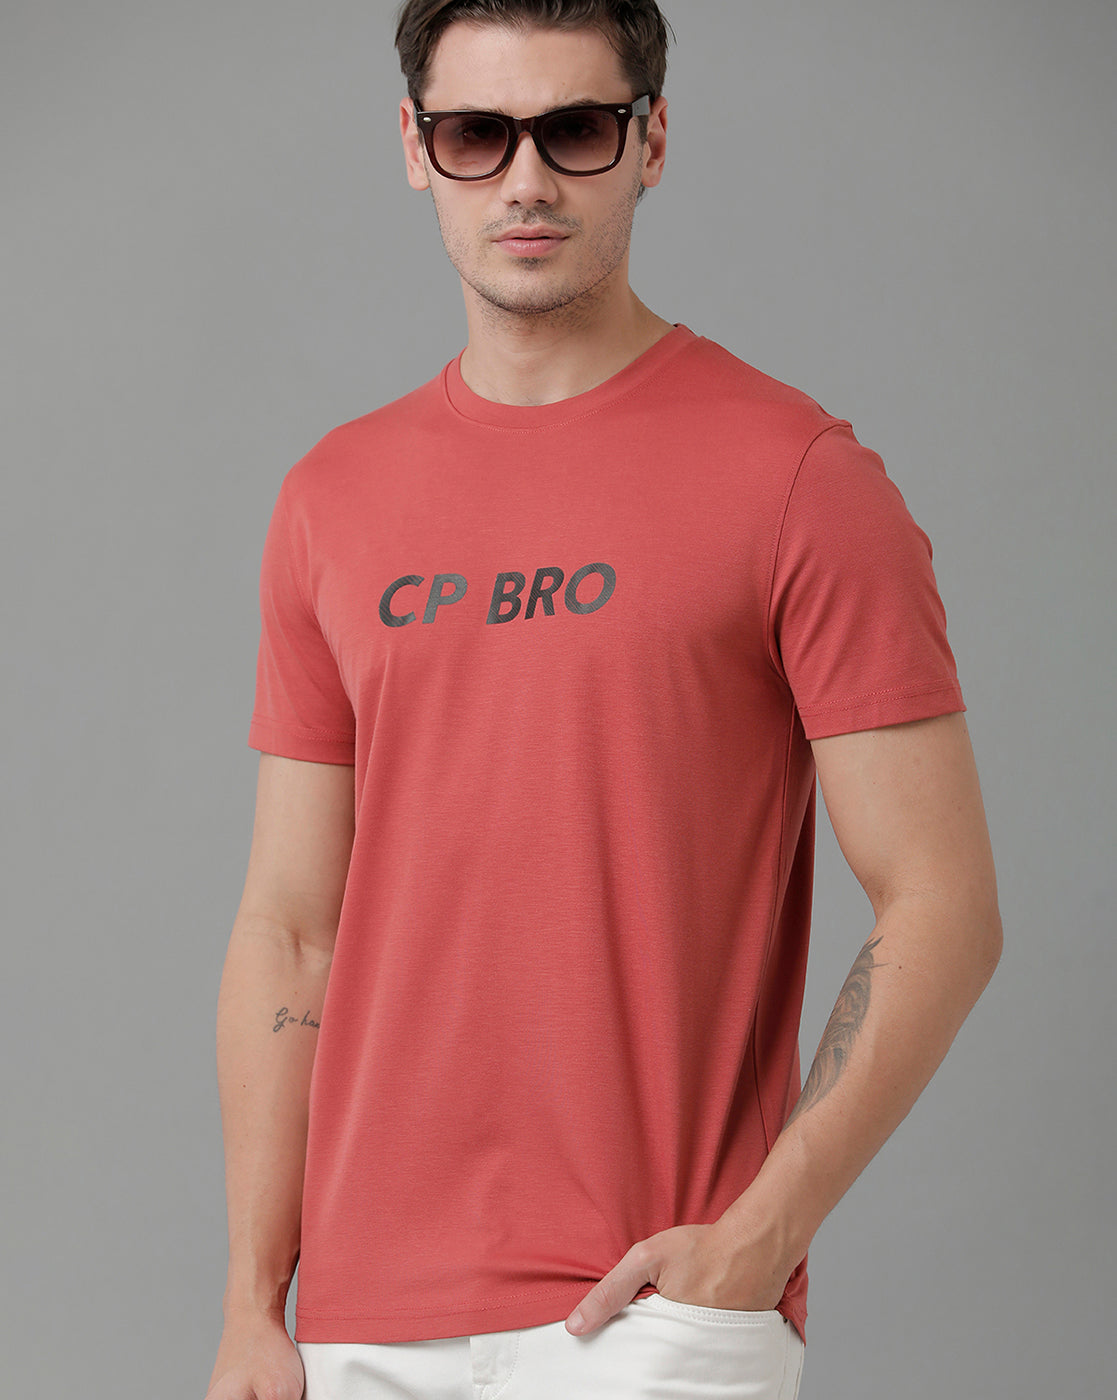 CP BRO Men's Cotton Half Sleeve Printed Slim Fit Round Neck Red Color T-Shirt | Brcn - 535 A